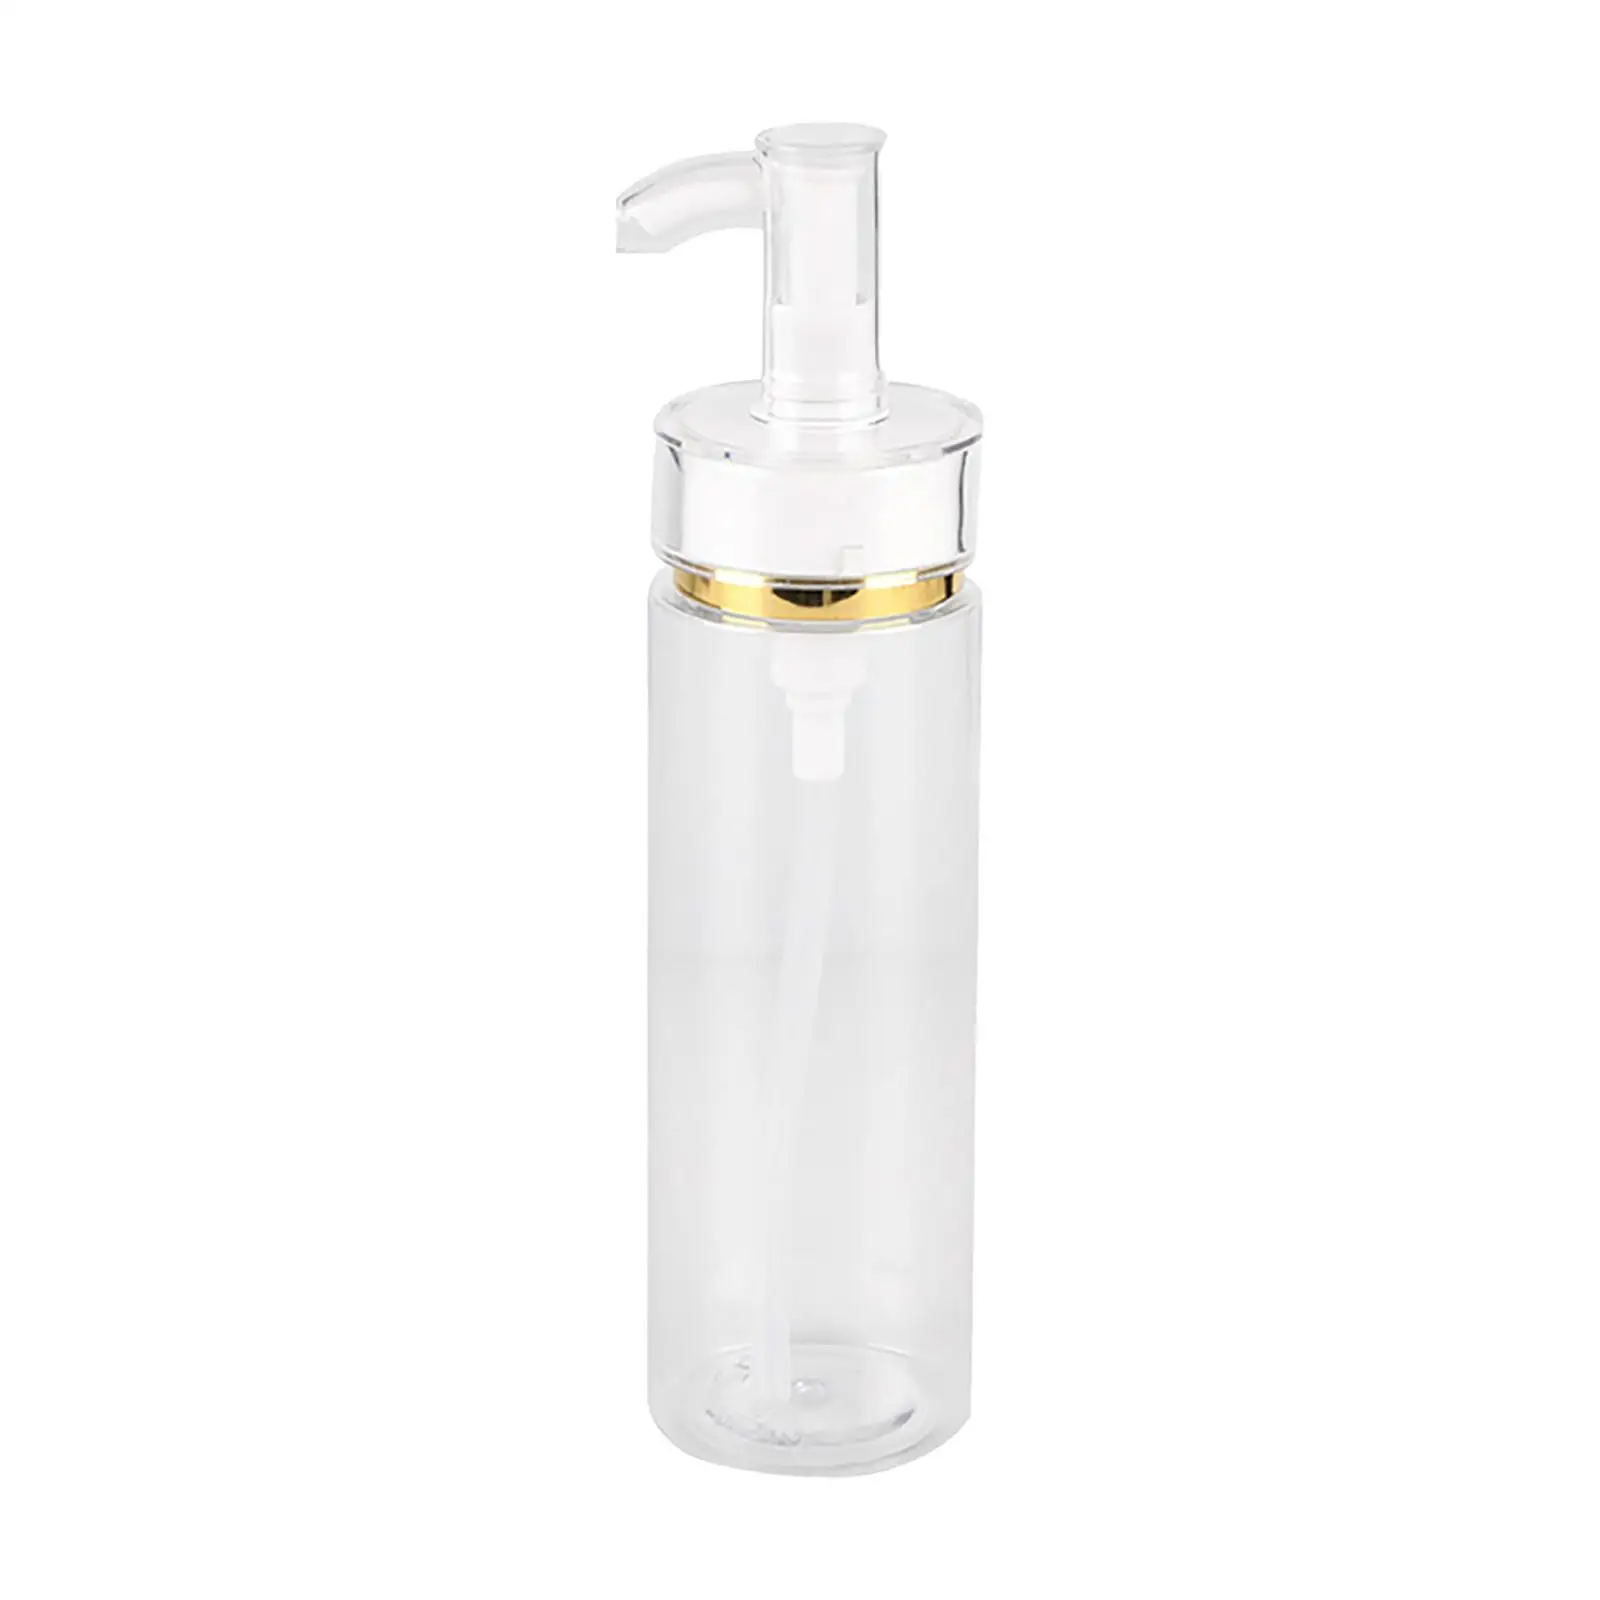 Refillable Lotion Bottles with Pumps Transparent 150ml Travel Container for Shower Shampoo Makeup Liquid Washing Soap